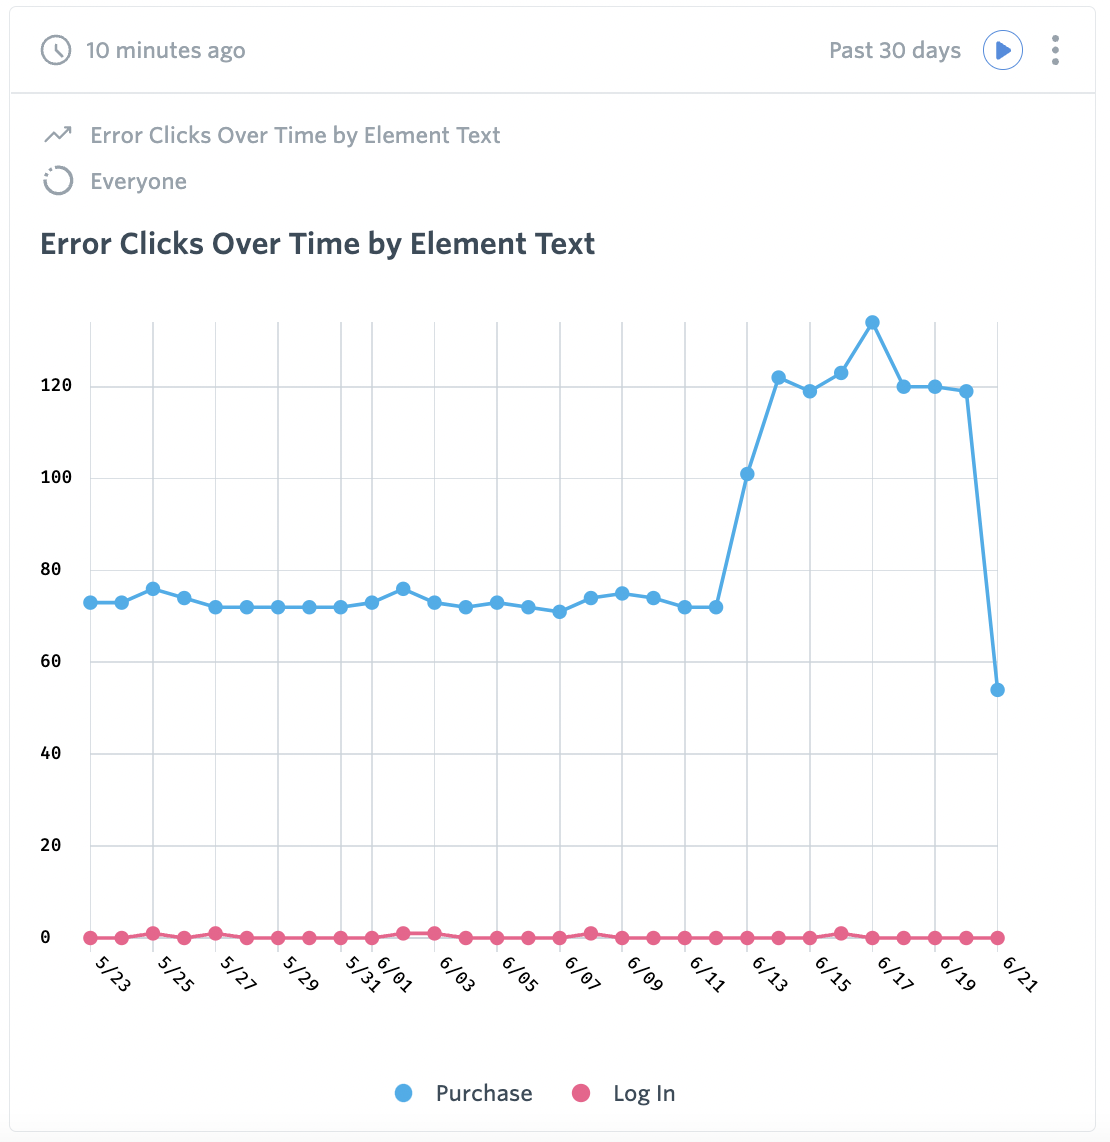 Error Clicks Over Time by Element Text